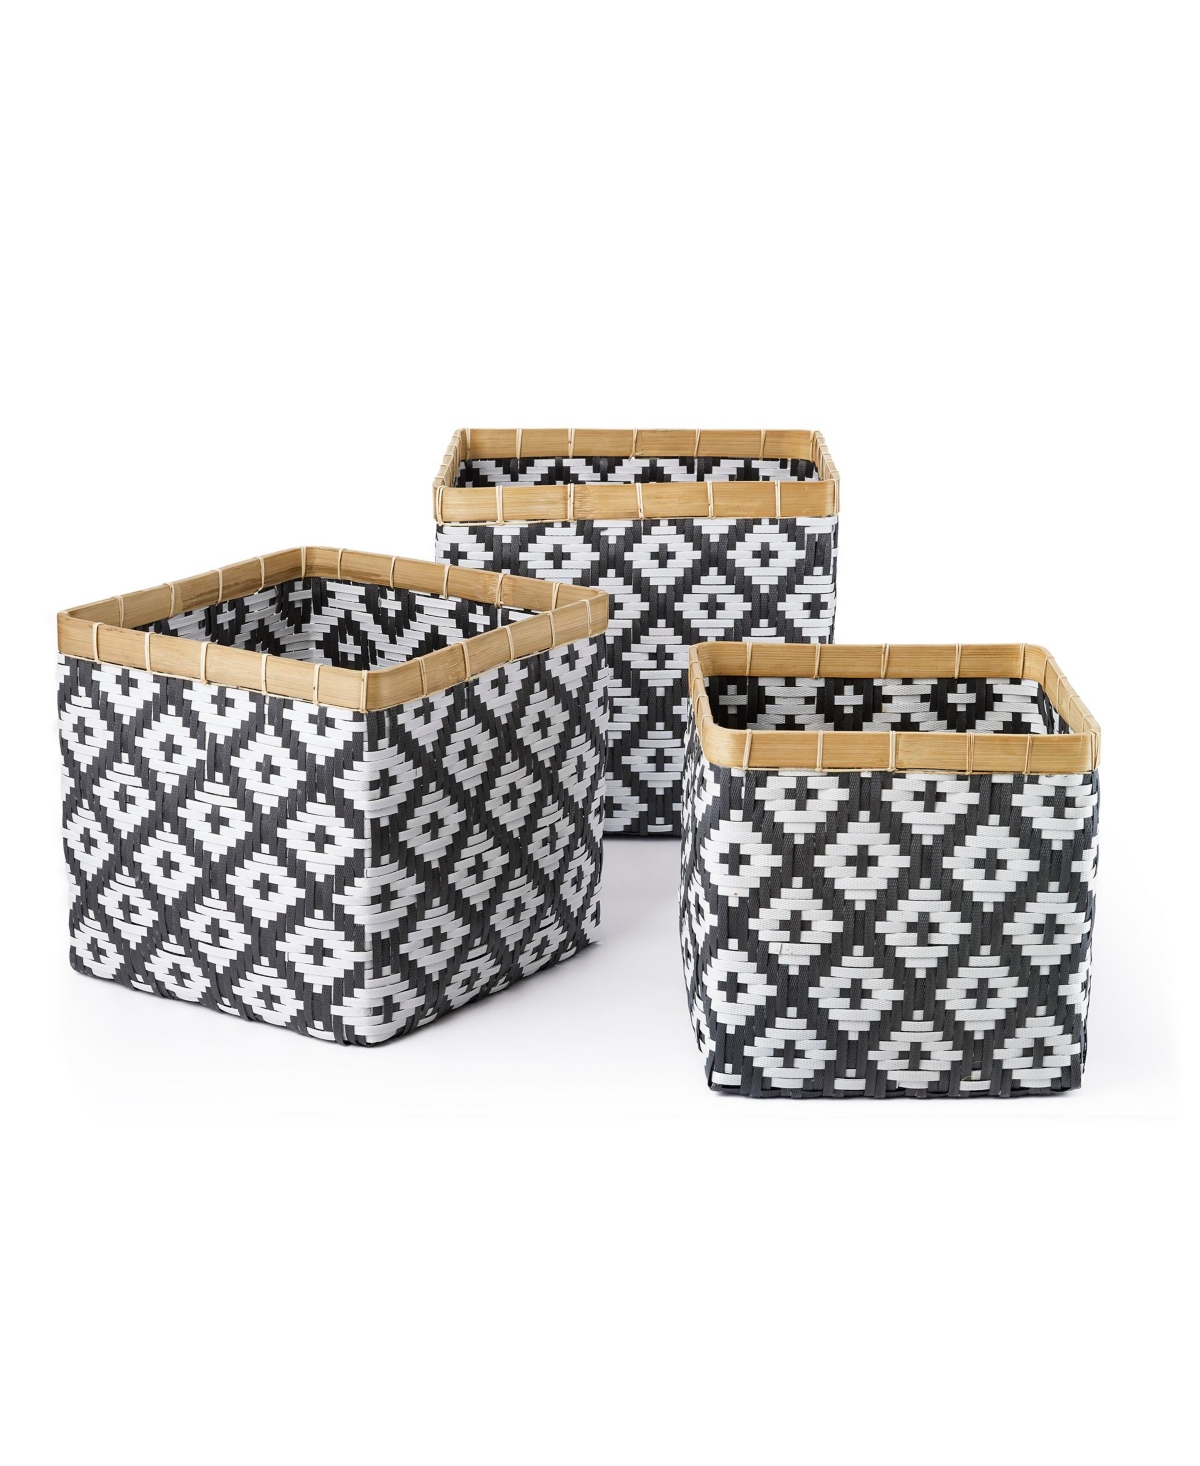 Baum 3 Piece Square Bamboo Basket Set With No Handles, Natural Rim In Black And White